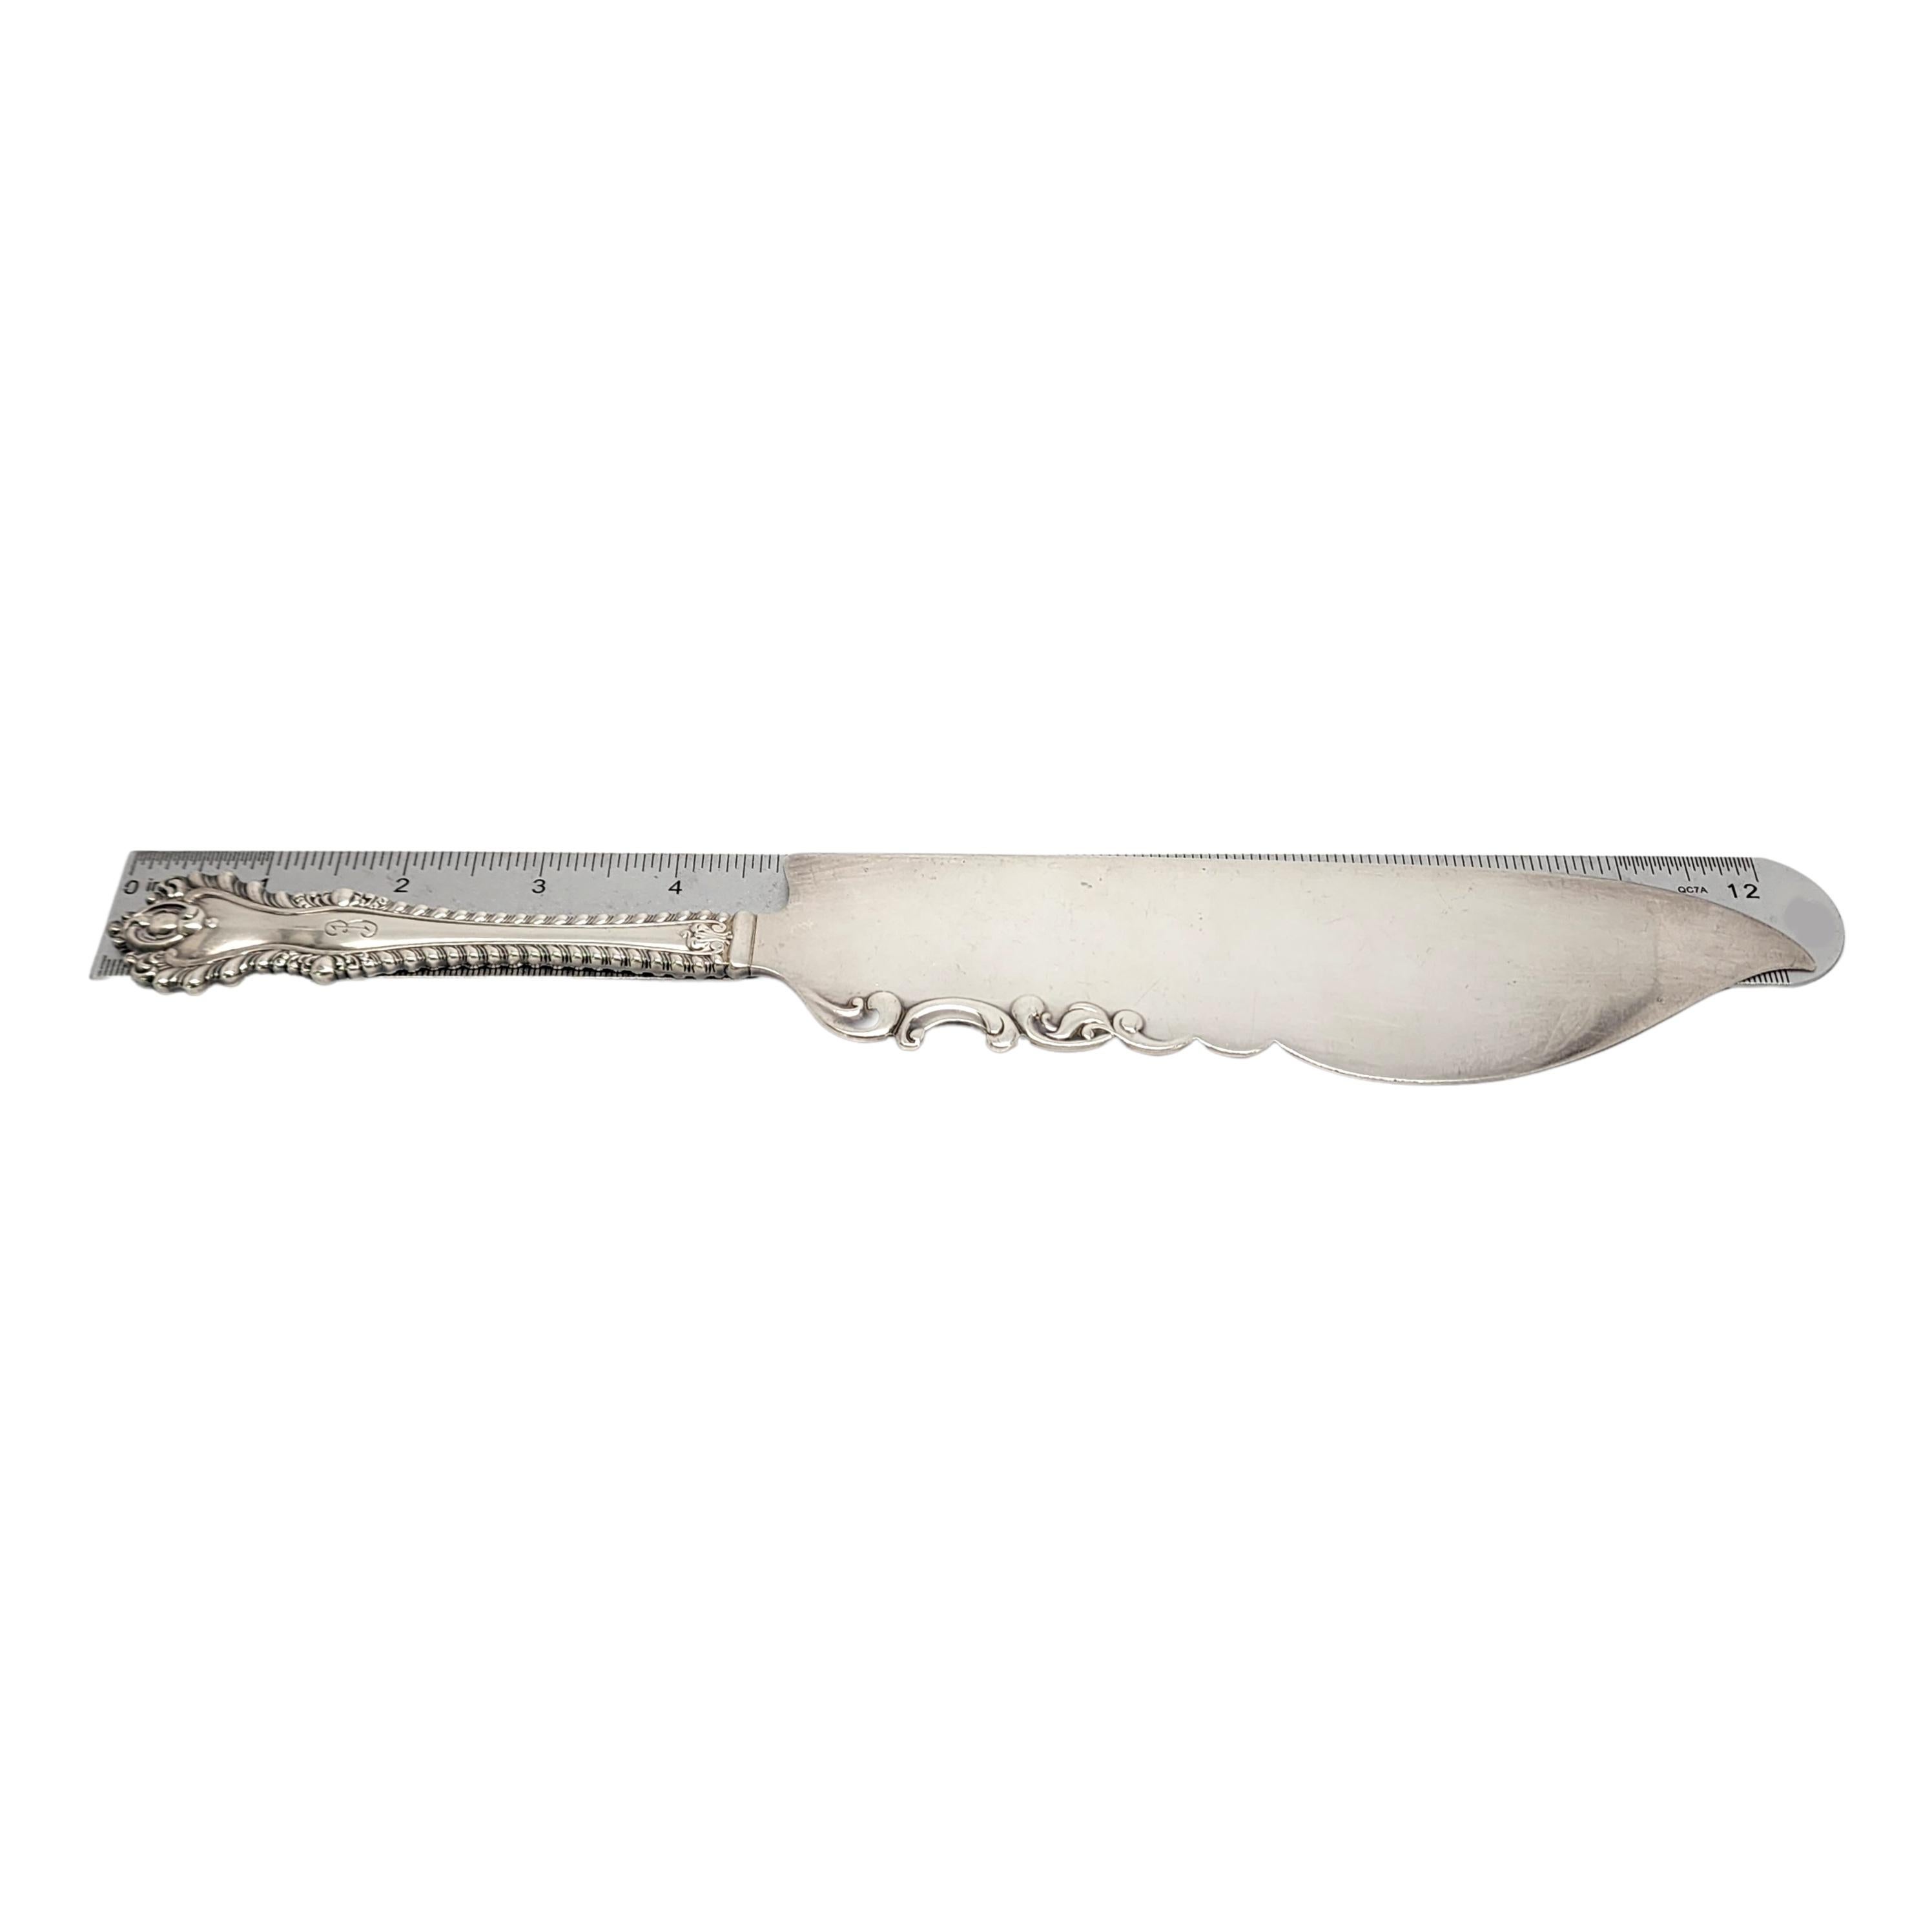 Antique large solid sterling silver ice cream server by Dominick & Haff in the Mazarin 1892 pattern.

Monogram appears to be B

Dominick & Haff's Mazarin pattern was introduced in 1892. This ice cream server is larger than most and features an